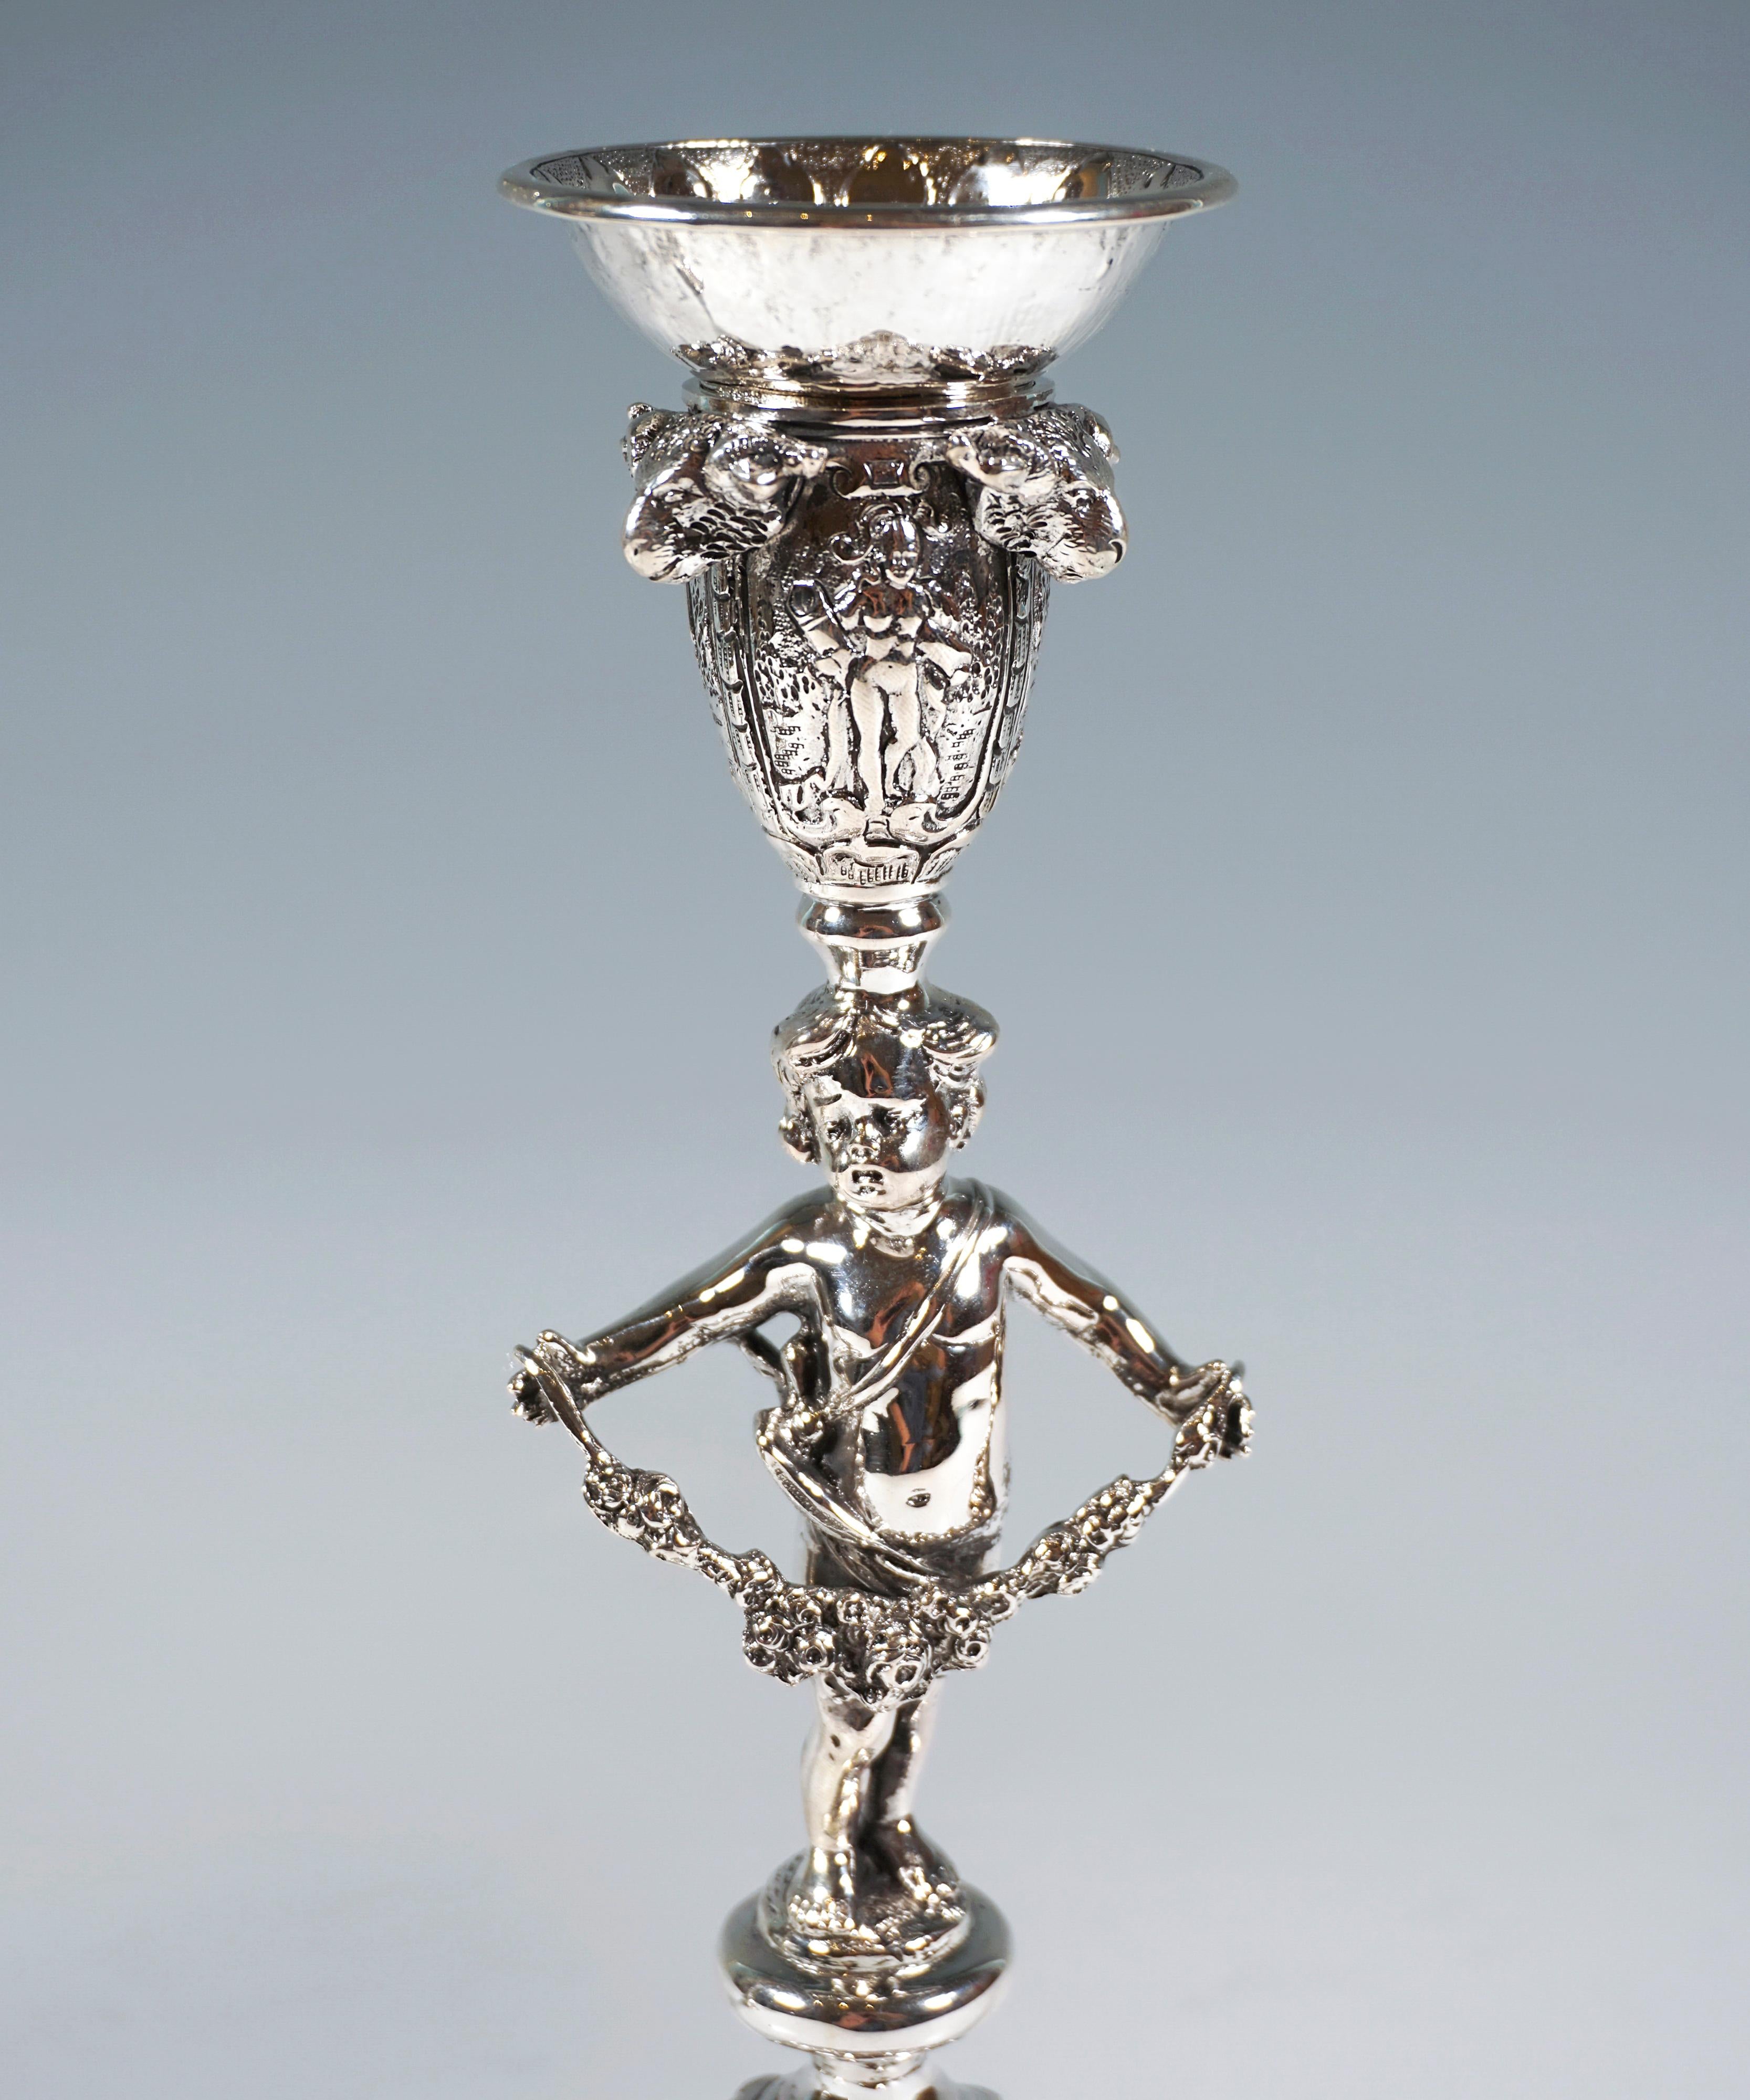 Pair of richly decorated candlesticks on a high base, bulging body, with a fully sculpted putto carrying a garland in place of the shaft, balancing the vase-shaped spout with sculpted rams' heads on its head.
Rich floral decoration, as well as